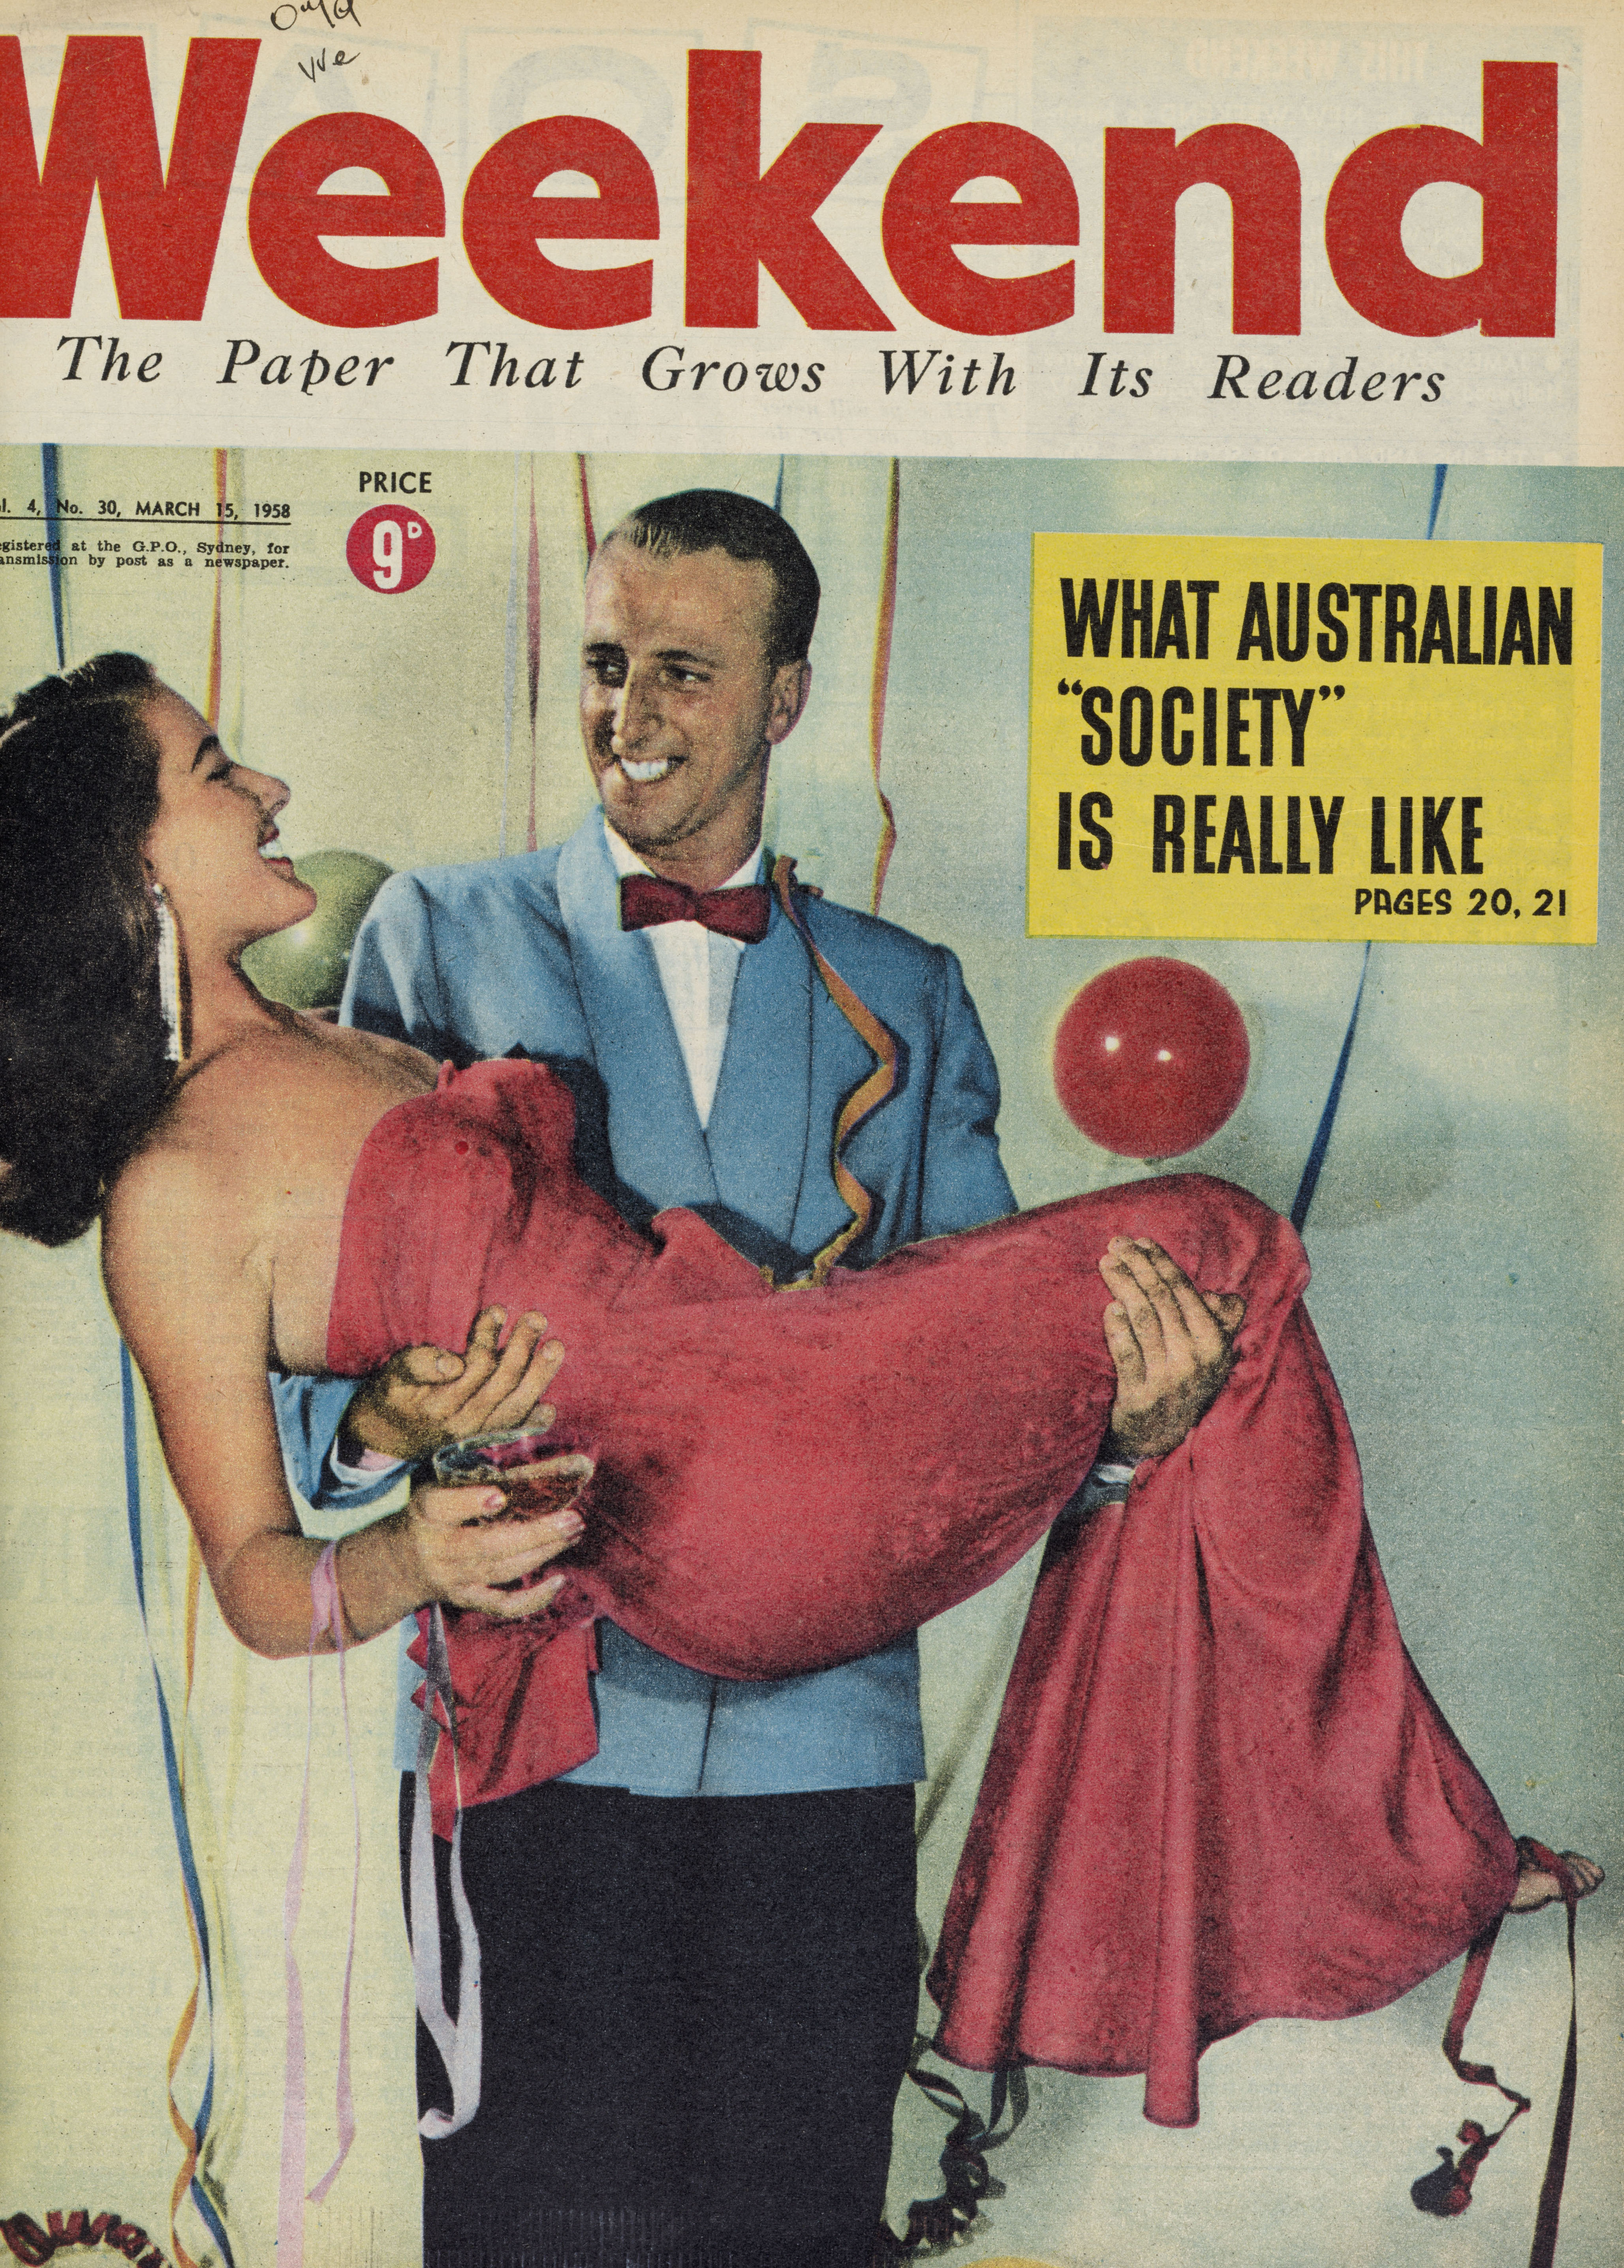 An old magazine cover, featuring a smiling man in a blue suit, carrying a woman in a red dress princess-style, with a backdrop of balloons and streamers, headlined "What Australian "society" is really like".